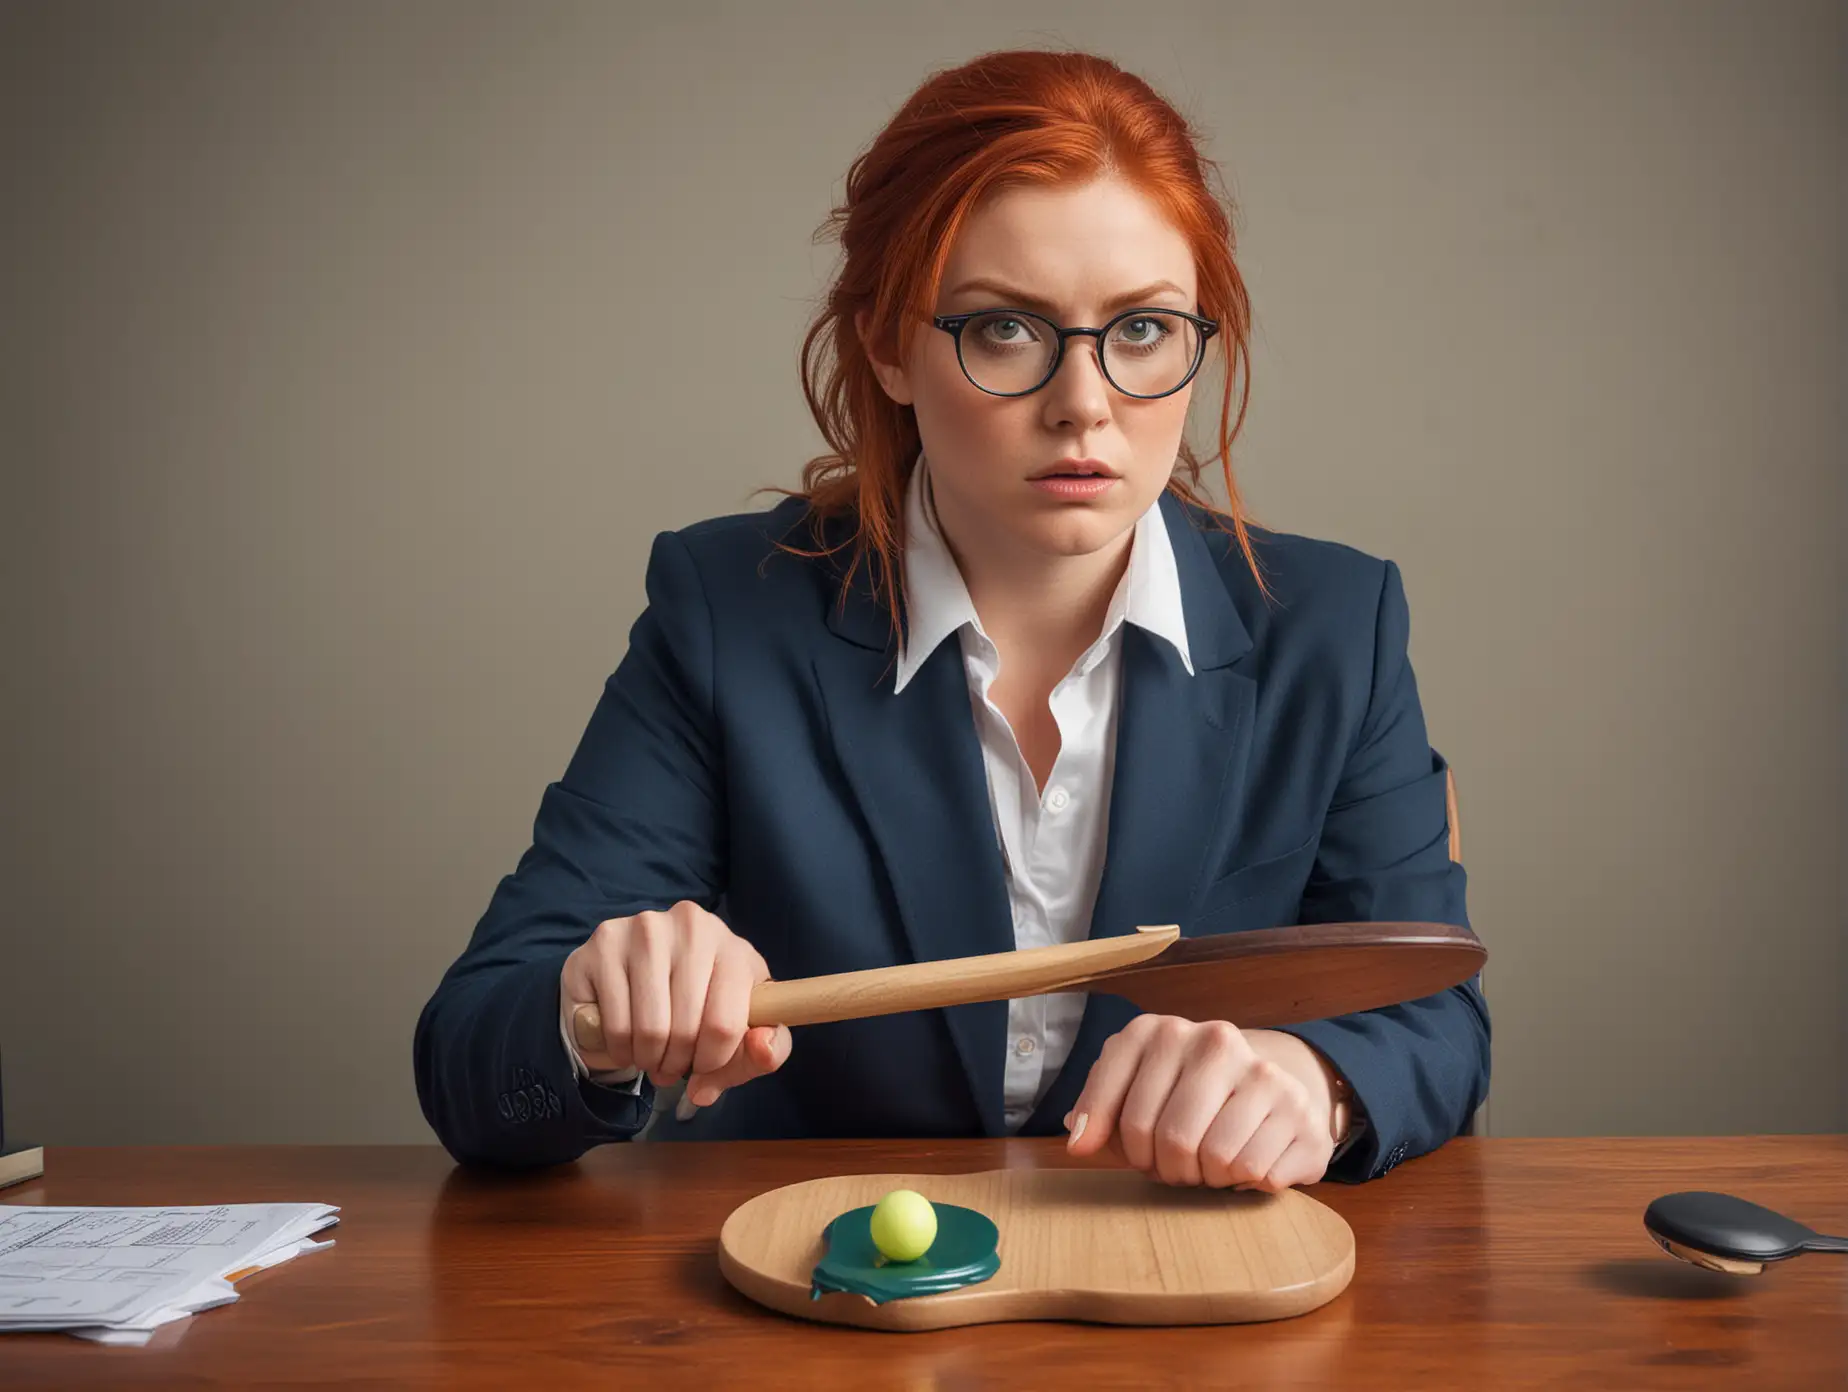 A Business woman is sitting on the desk in her office. She is staring at me with an extremely stern look on her face. She is about 25 with red hair, green eyes, and glasses. She is holding a very large wooden paddle shaped like a ping pong paddle. She is wearing a dark blue suit.